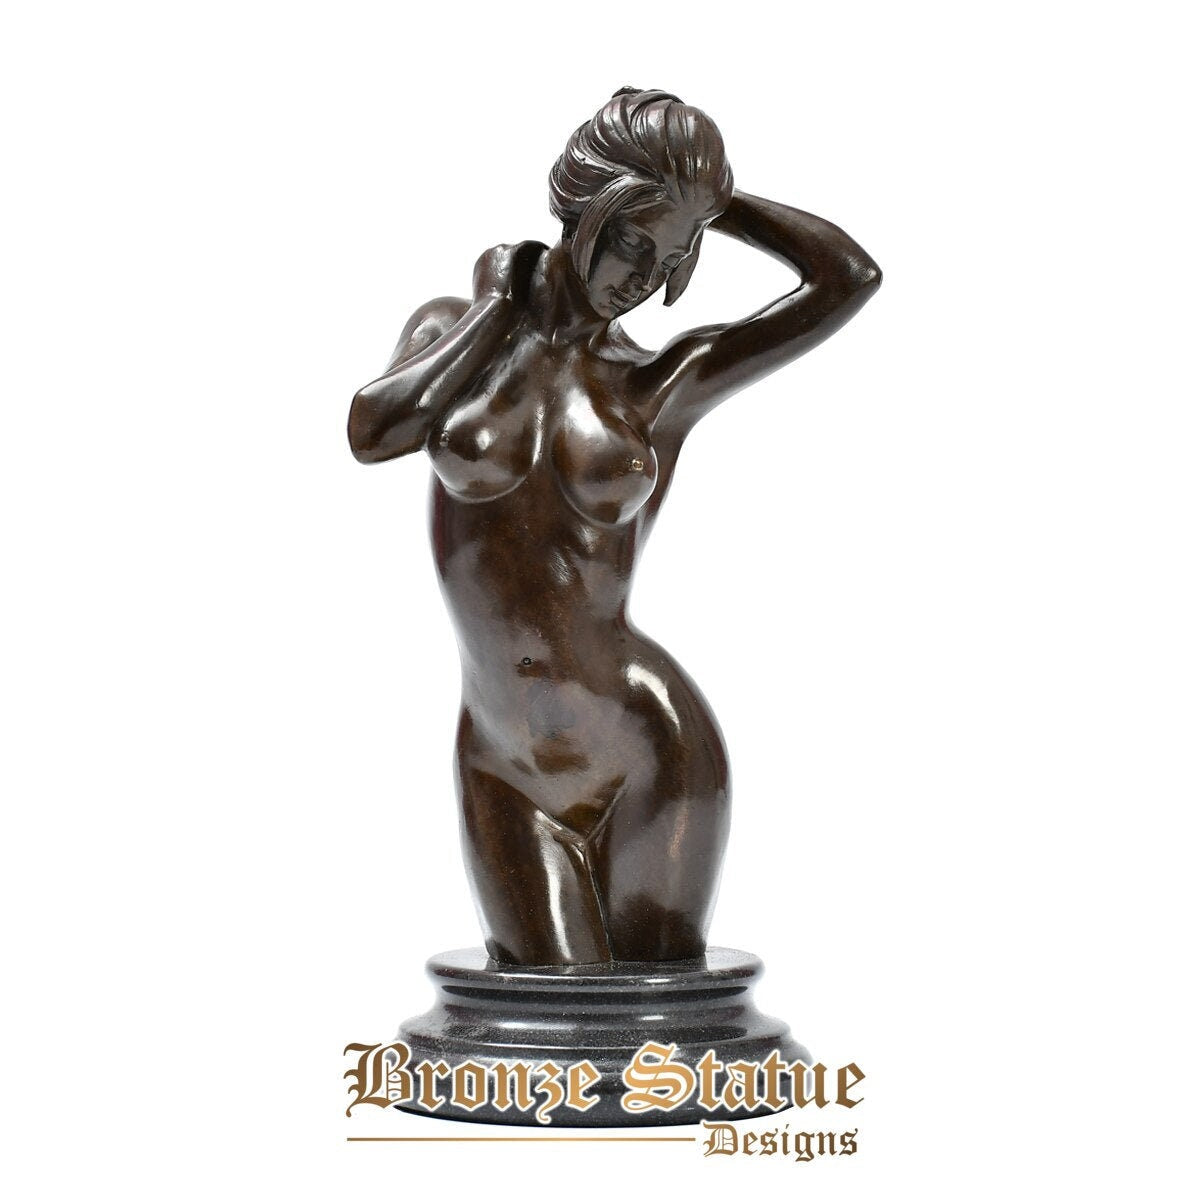 Sexy nude woman bronze statue naked girl bust sculpture erotic western female art collectible figurine